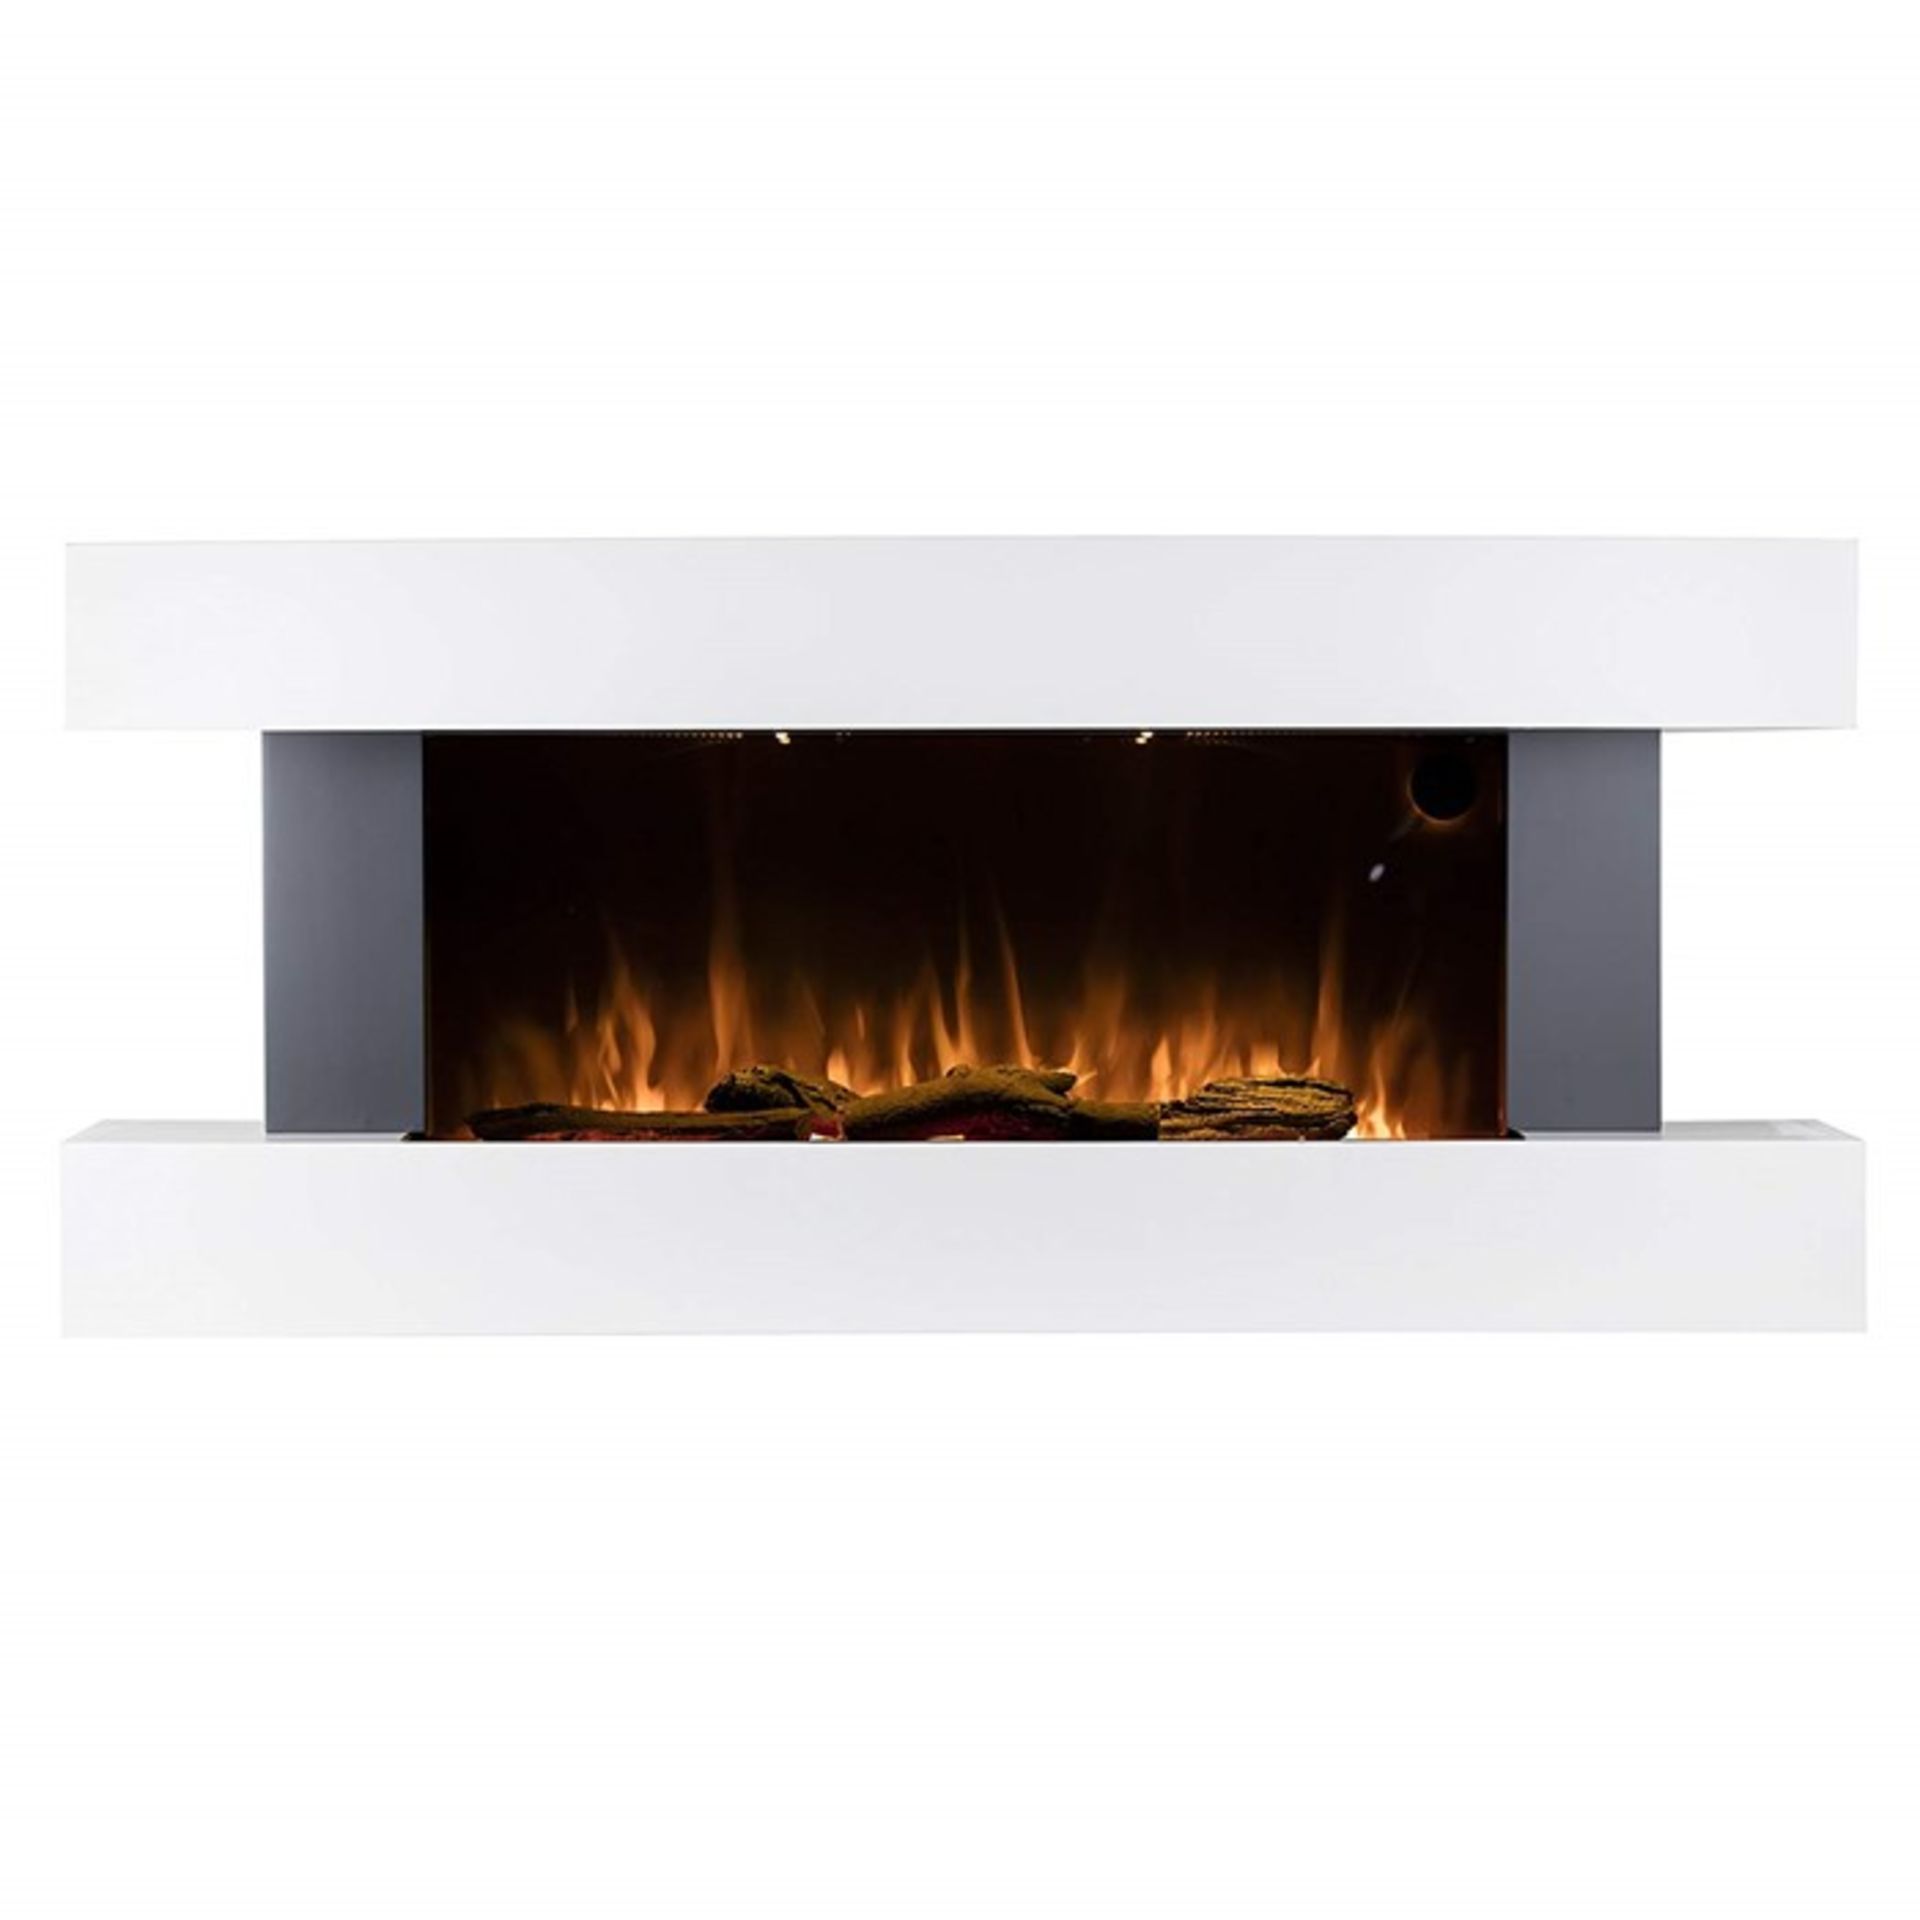 2000w Wall Mounted surround electric fire place suite with LED flame effect, new and boxed, features - Image 6 of 6